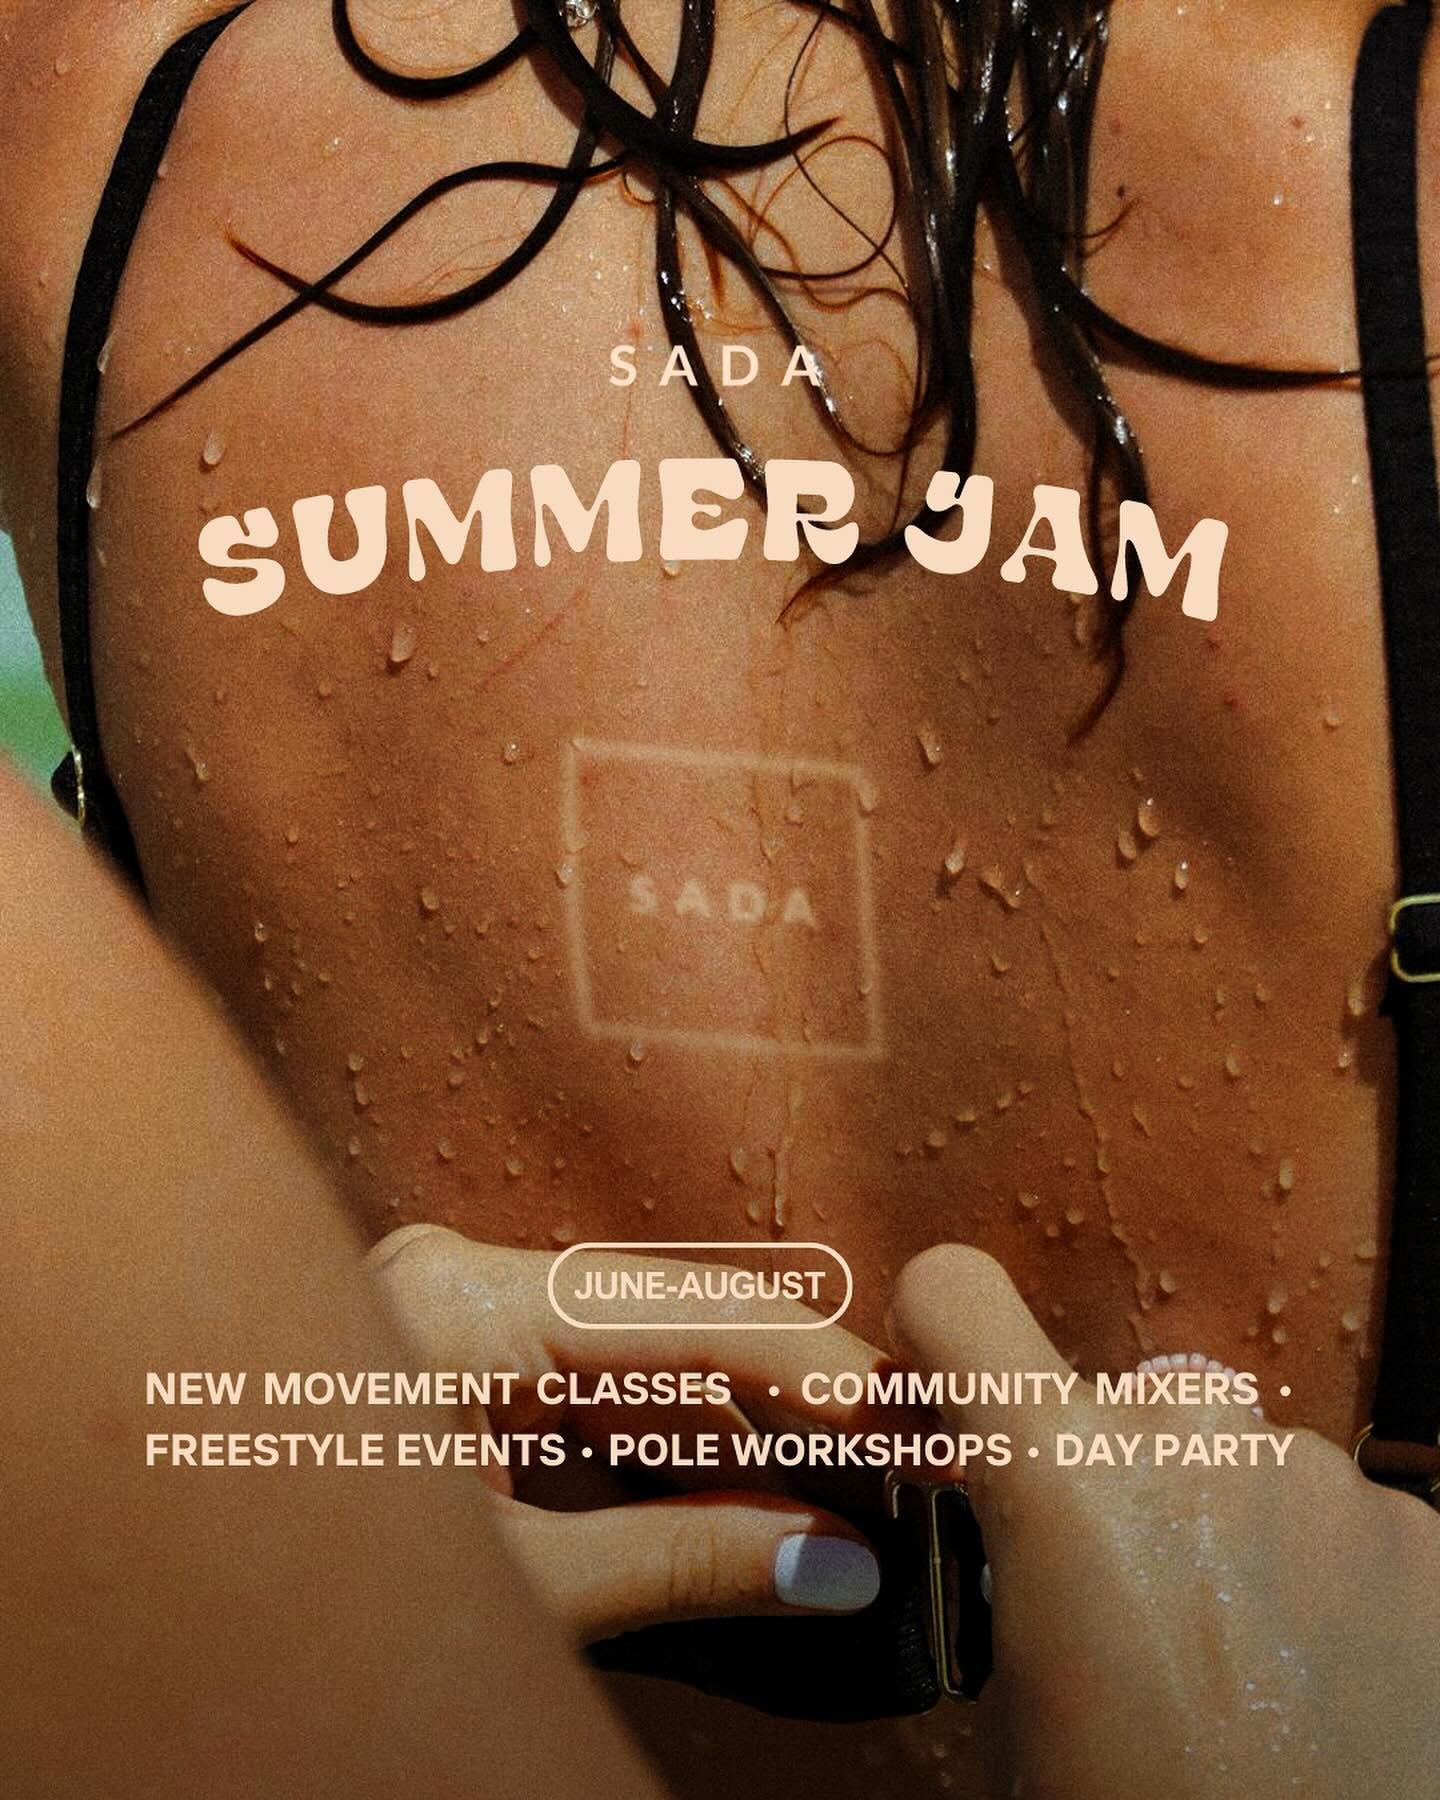 The time has come! Our Summer Jam waitlist is open. Sign up to get the first access to our June- August membership. Monthly and seasonal membership is available. 

Comment the word &lsquo;SUMMER&rsquo; for the registration link ☀️

#sadamoves